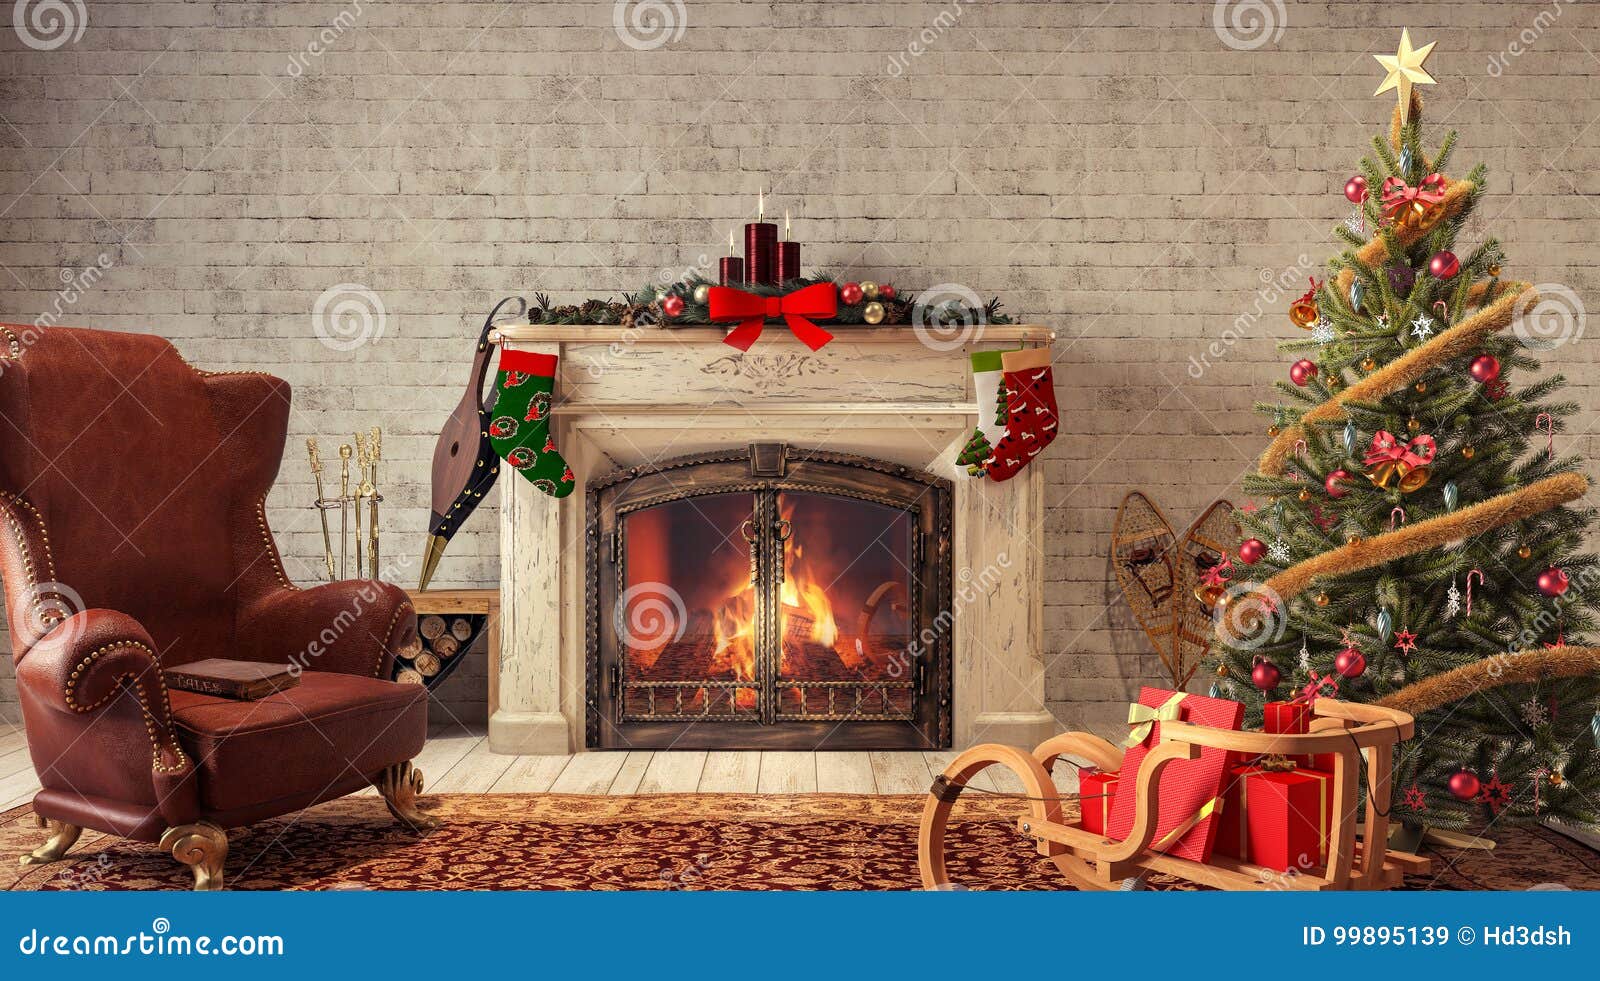 Christmas at home stock image. Image of home, brick, candle - 99895139